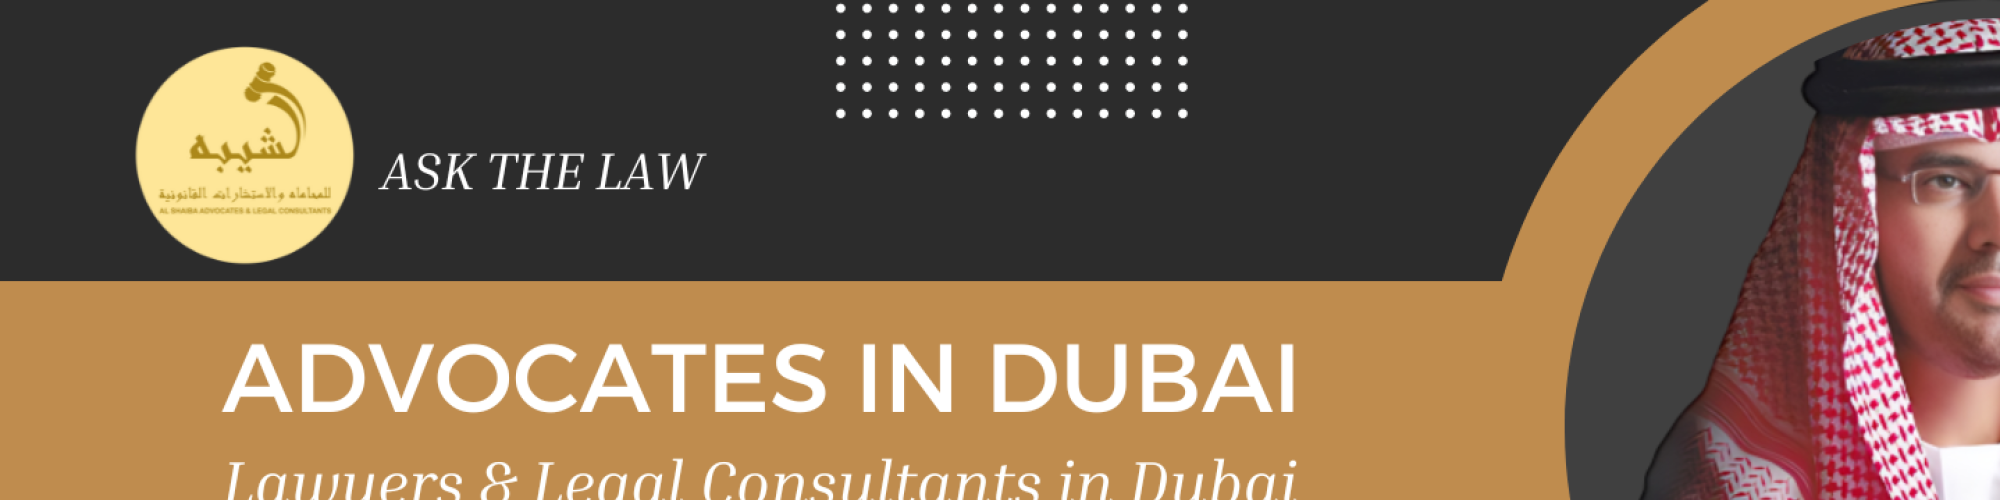  Lawyers in Abu Dhabi | Legal Consultants & Law Firms in Abu Dhabi